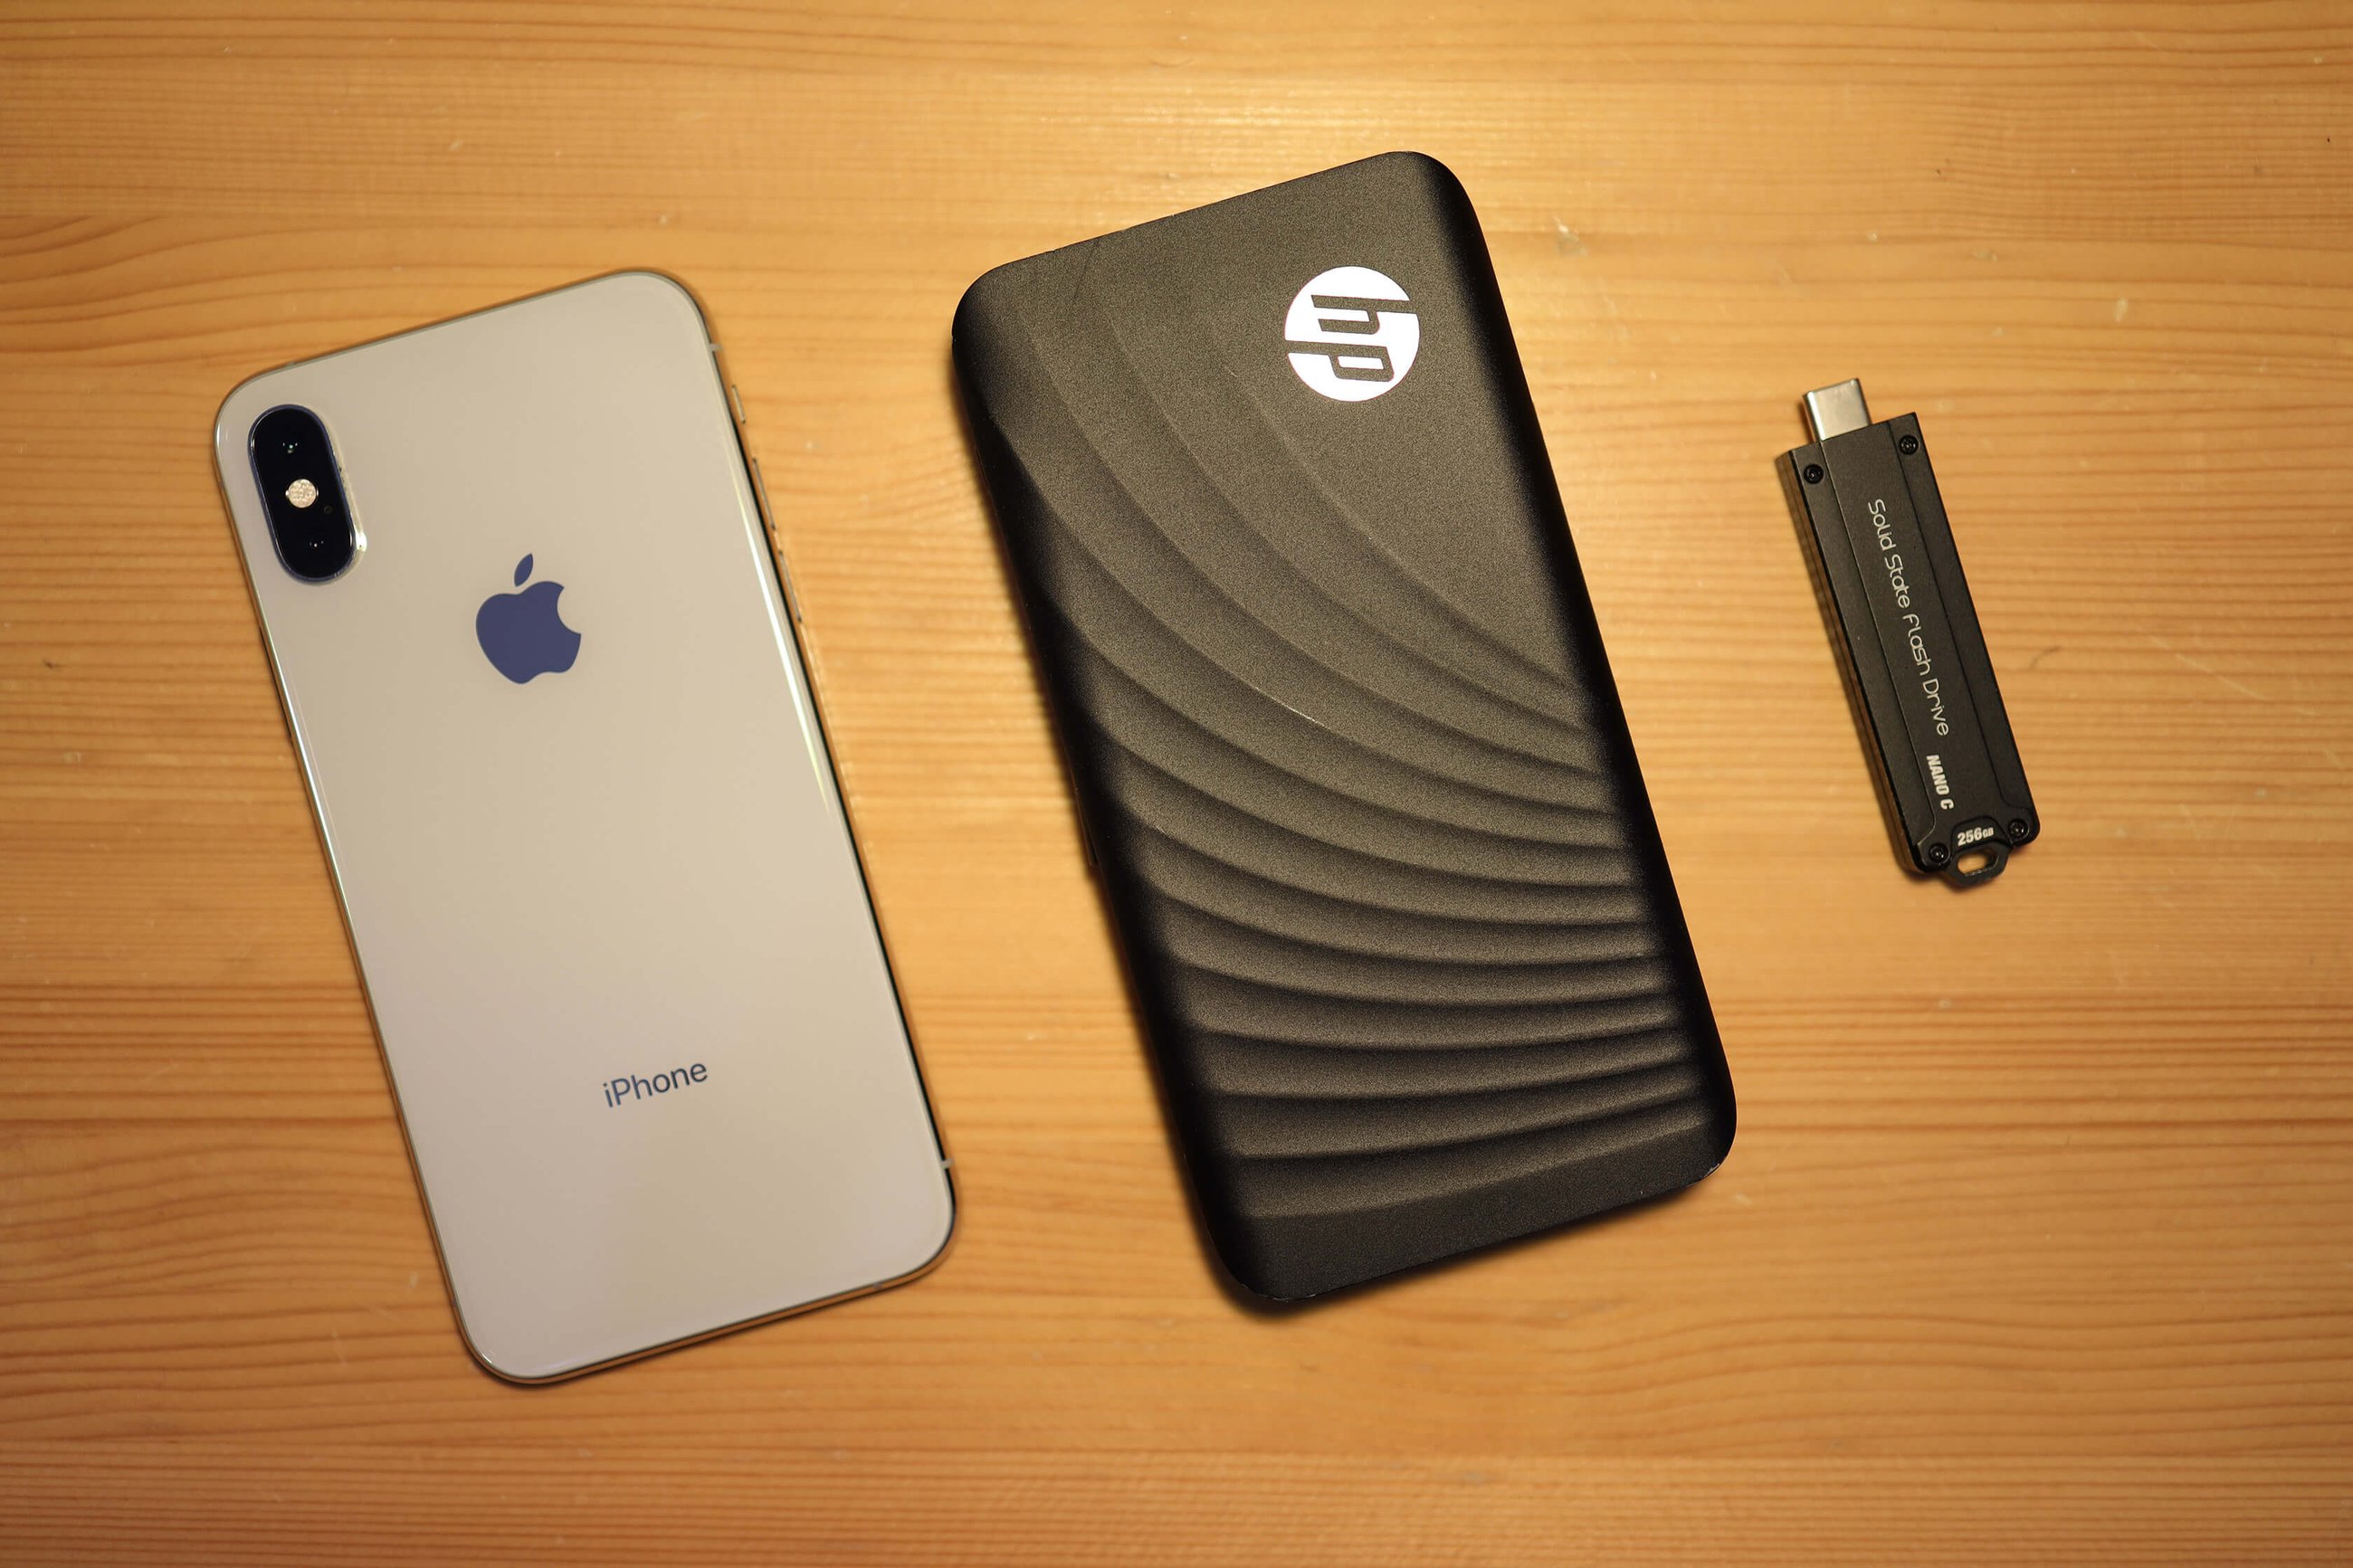 From left to right: iPhone XS, HP P800 Thunderbolt3 SSD, CHIPFANCIER USB3.1 Gen2 Type-C SSD